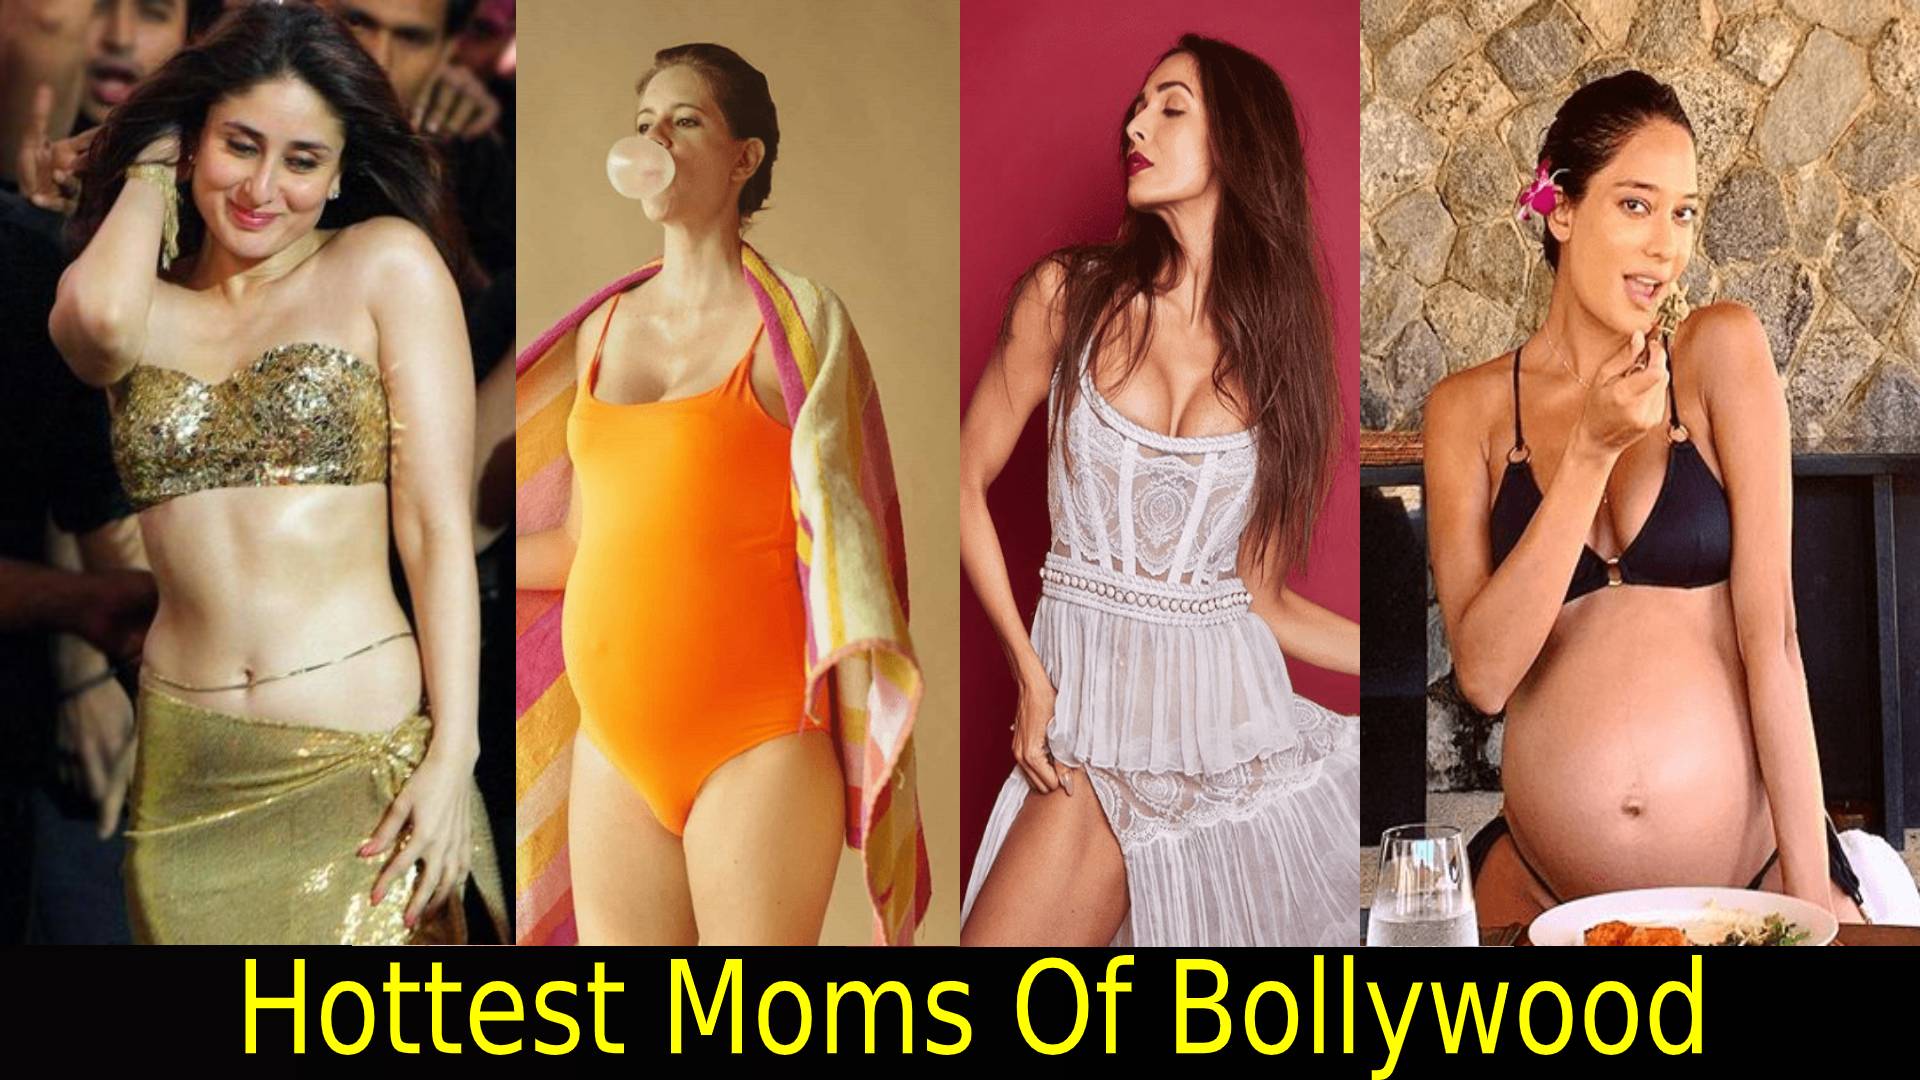 Top 6 hottest moms of Bollywood